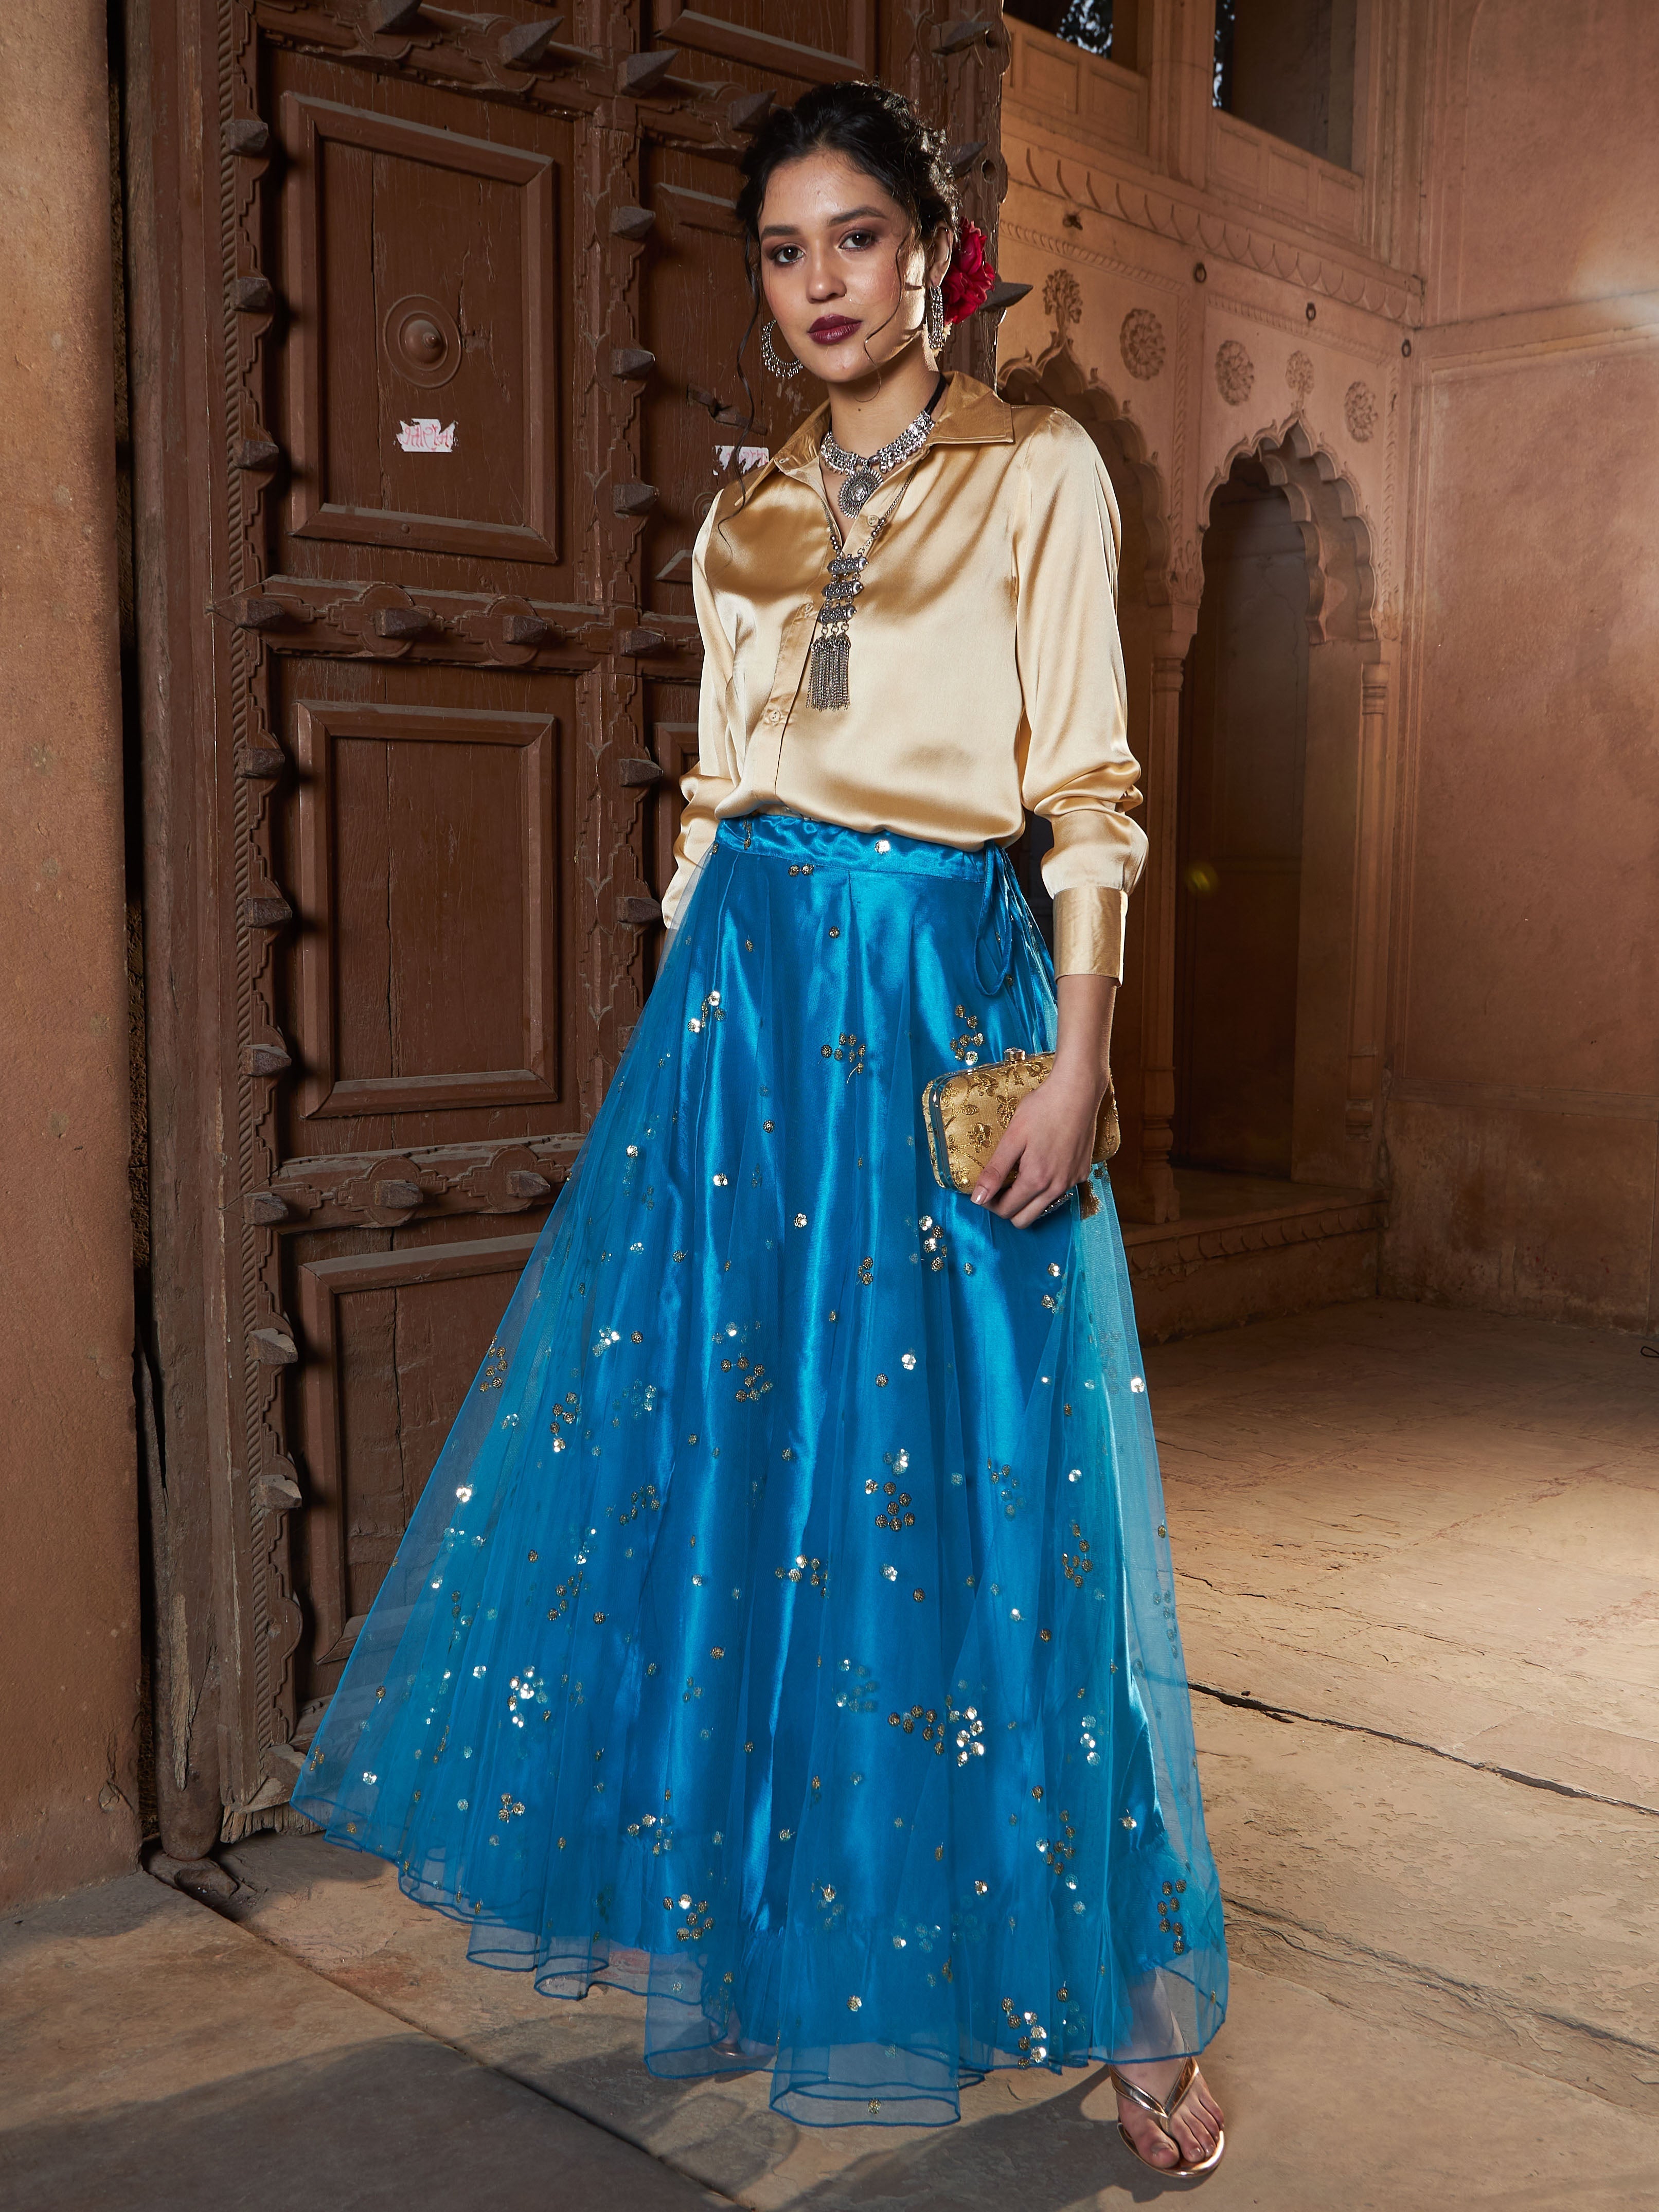 Women's Gold Satin Shirt With Teal Tulle Sequin Skirt - Lyush